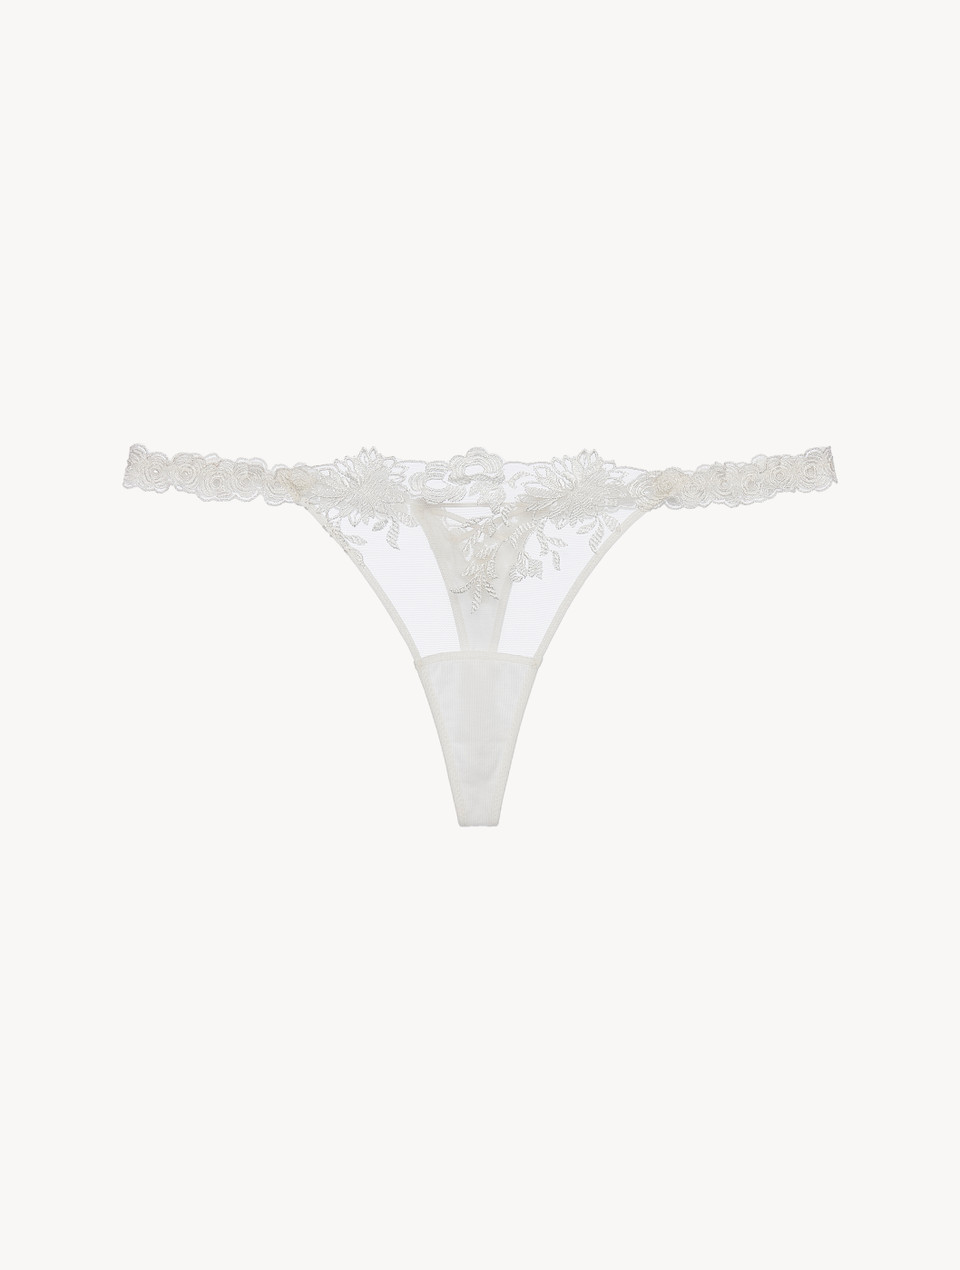 Thong in off-white Lycra with embroidered tulle - La Perla - US